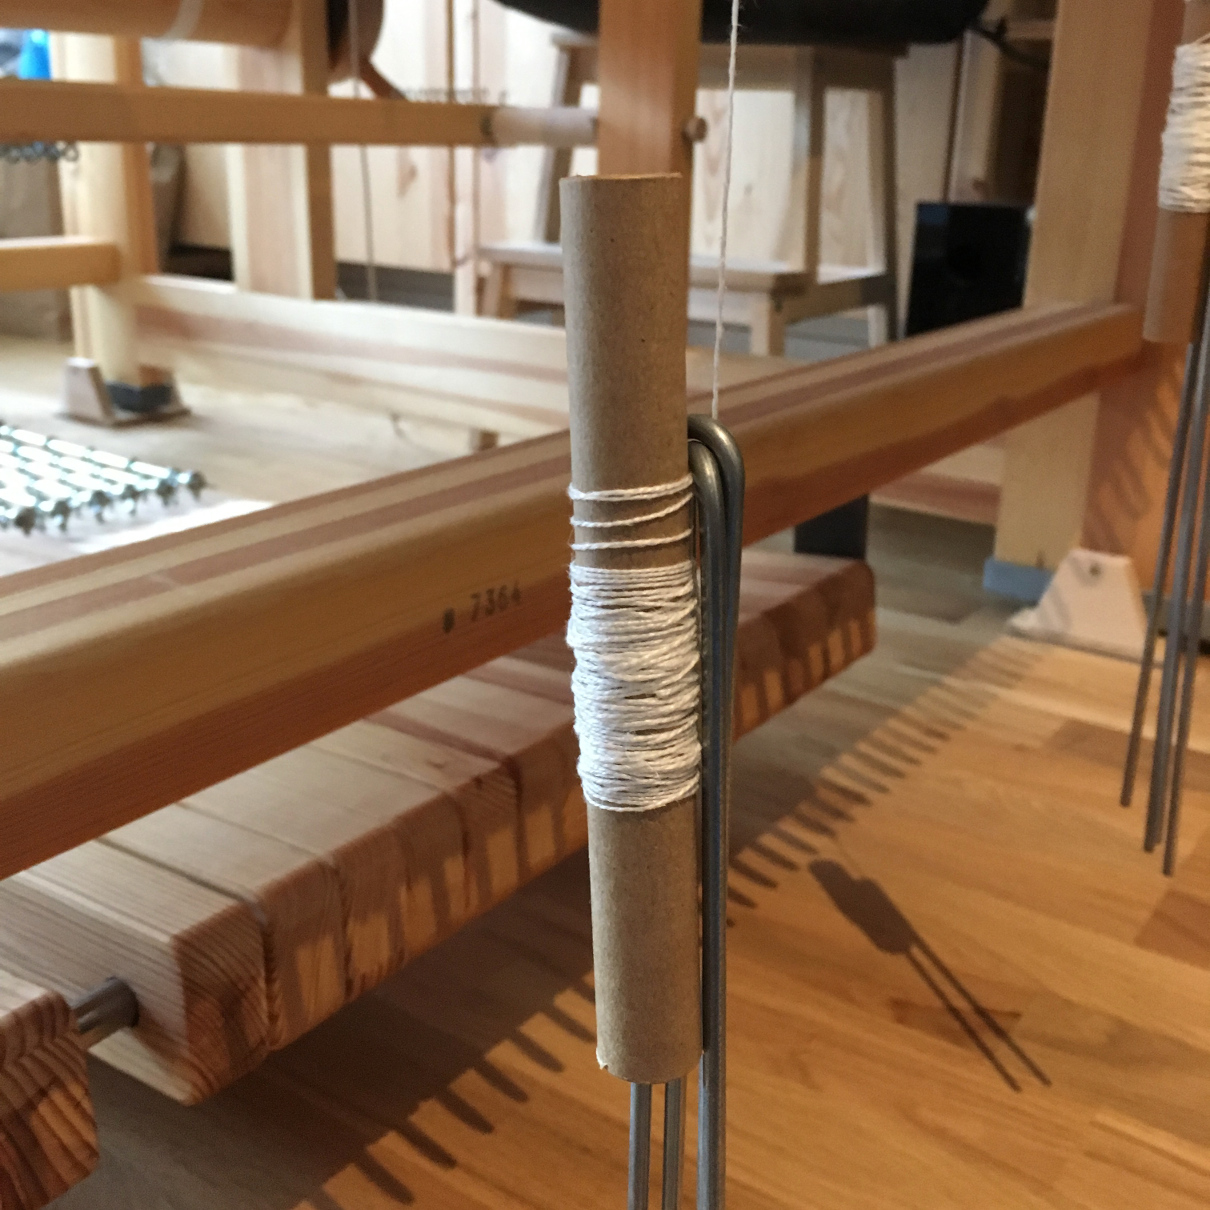 Photograph of a bobbin dangling at the back of the loom, weighted down by several U-shaped damask weights.